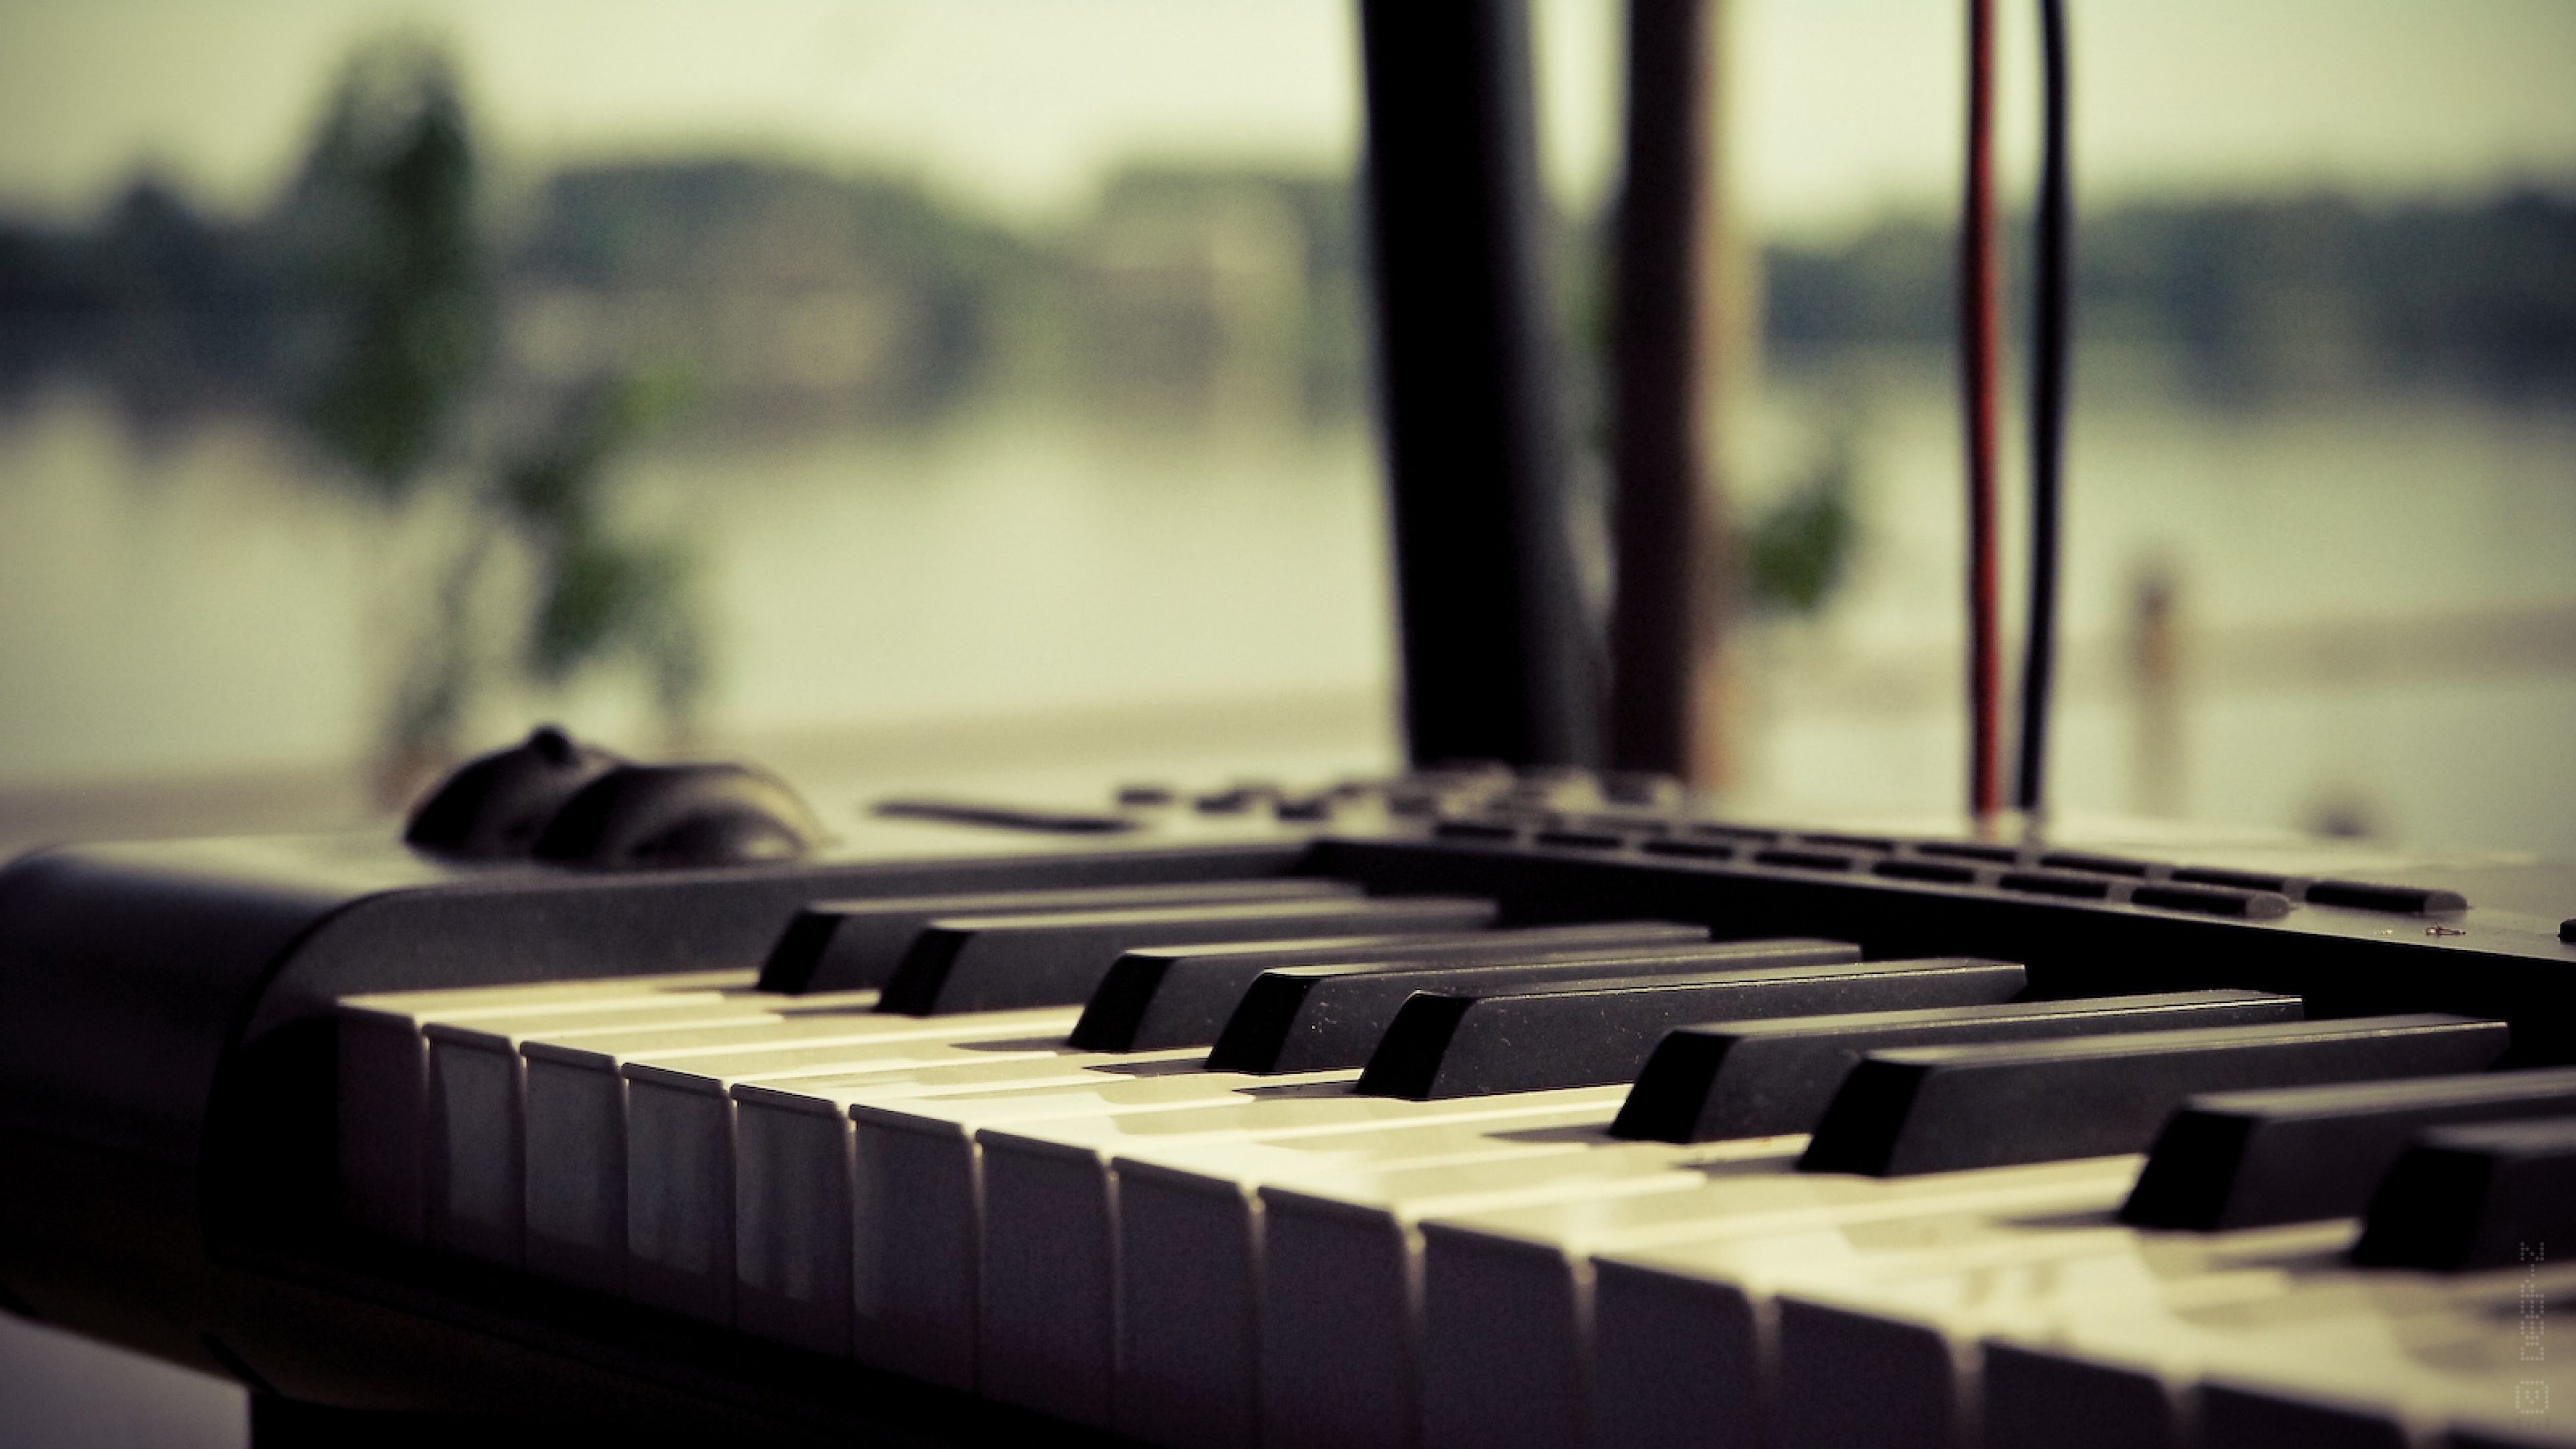 20 4K Piano Wallpapers  Background Images